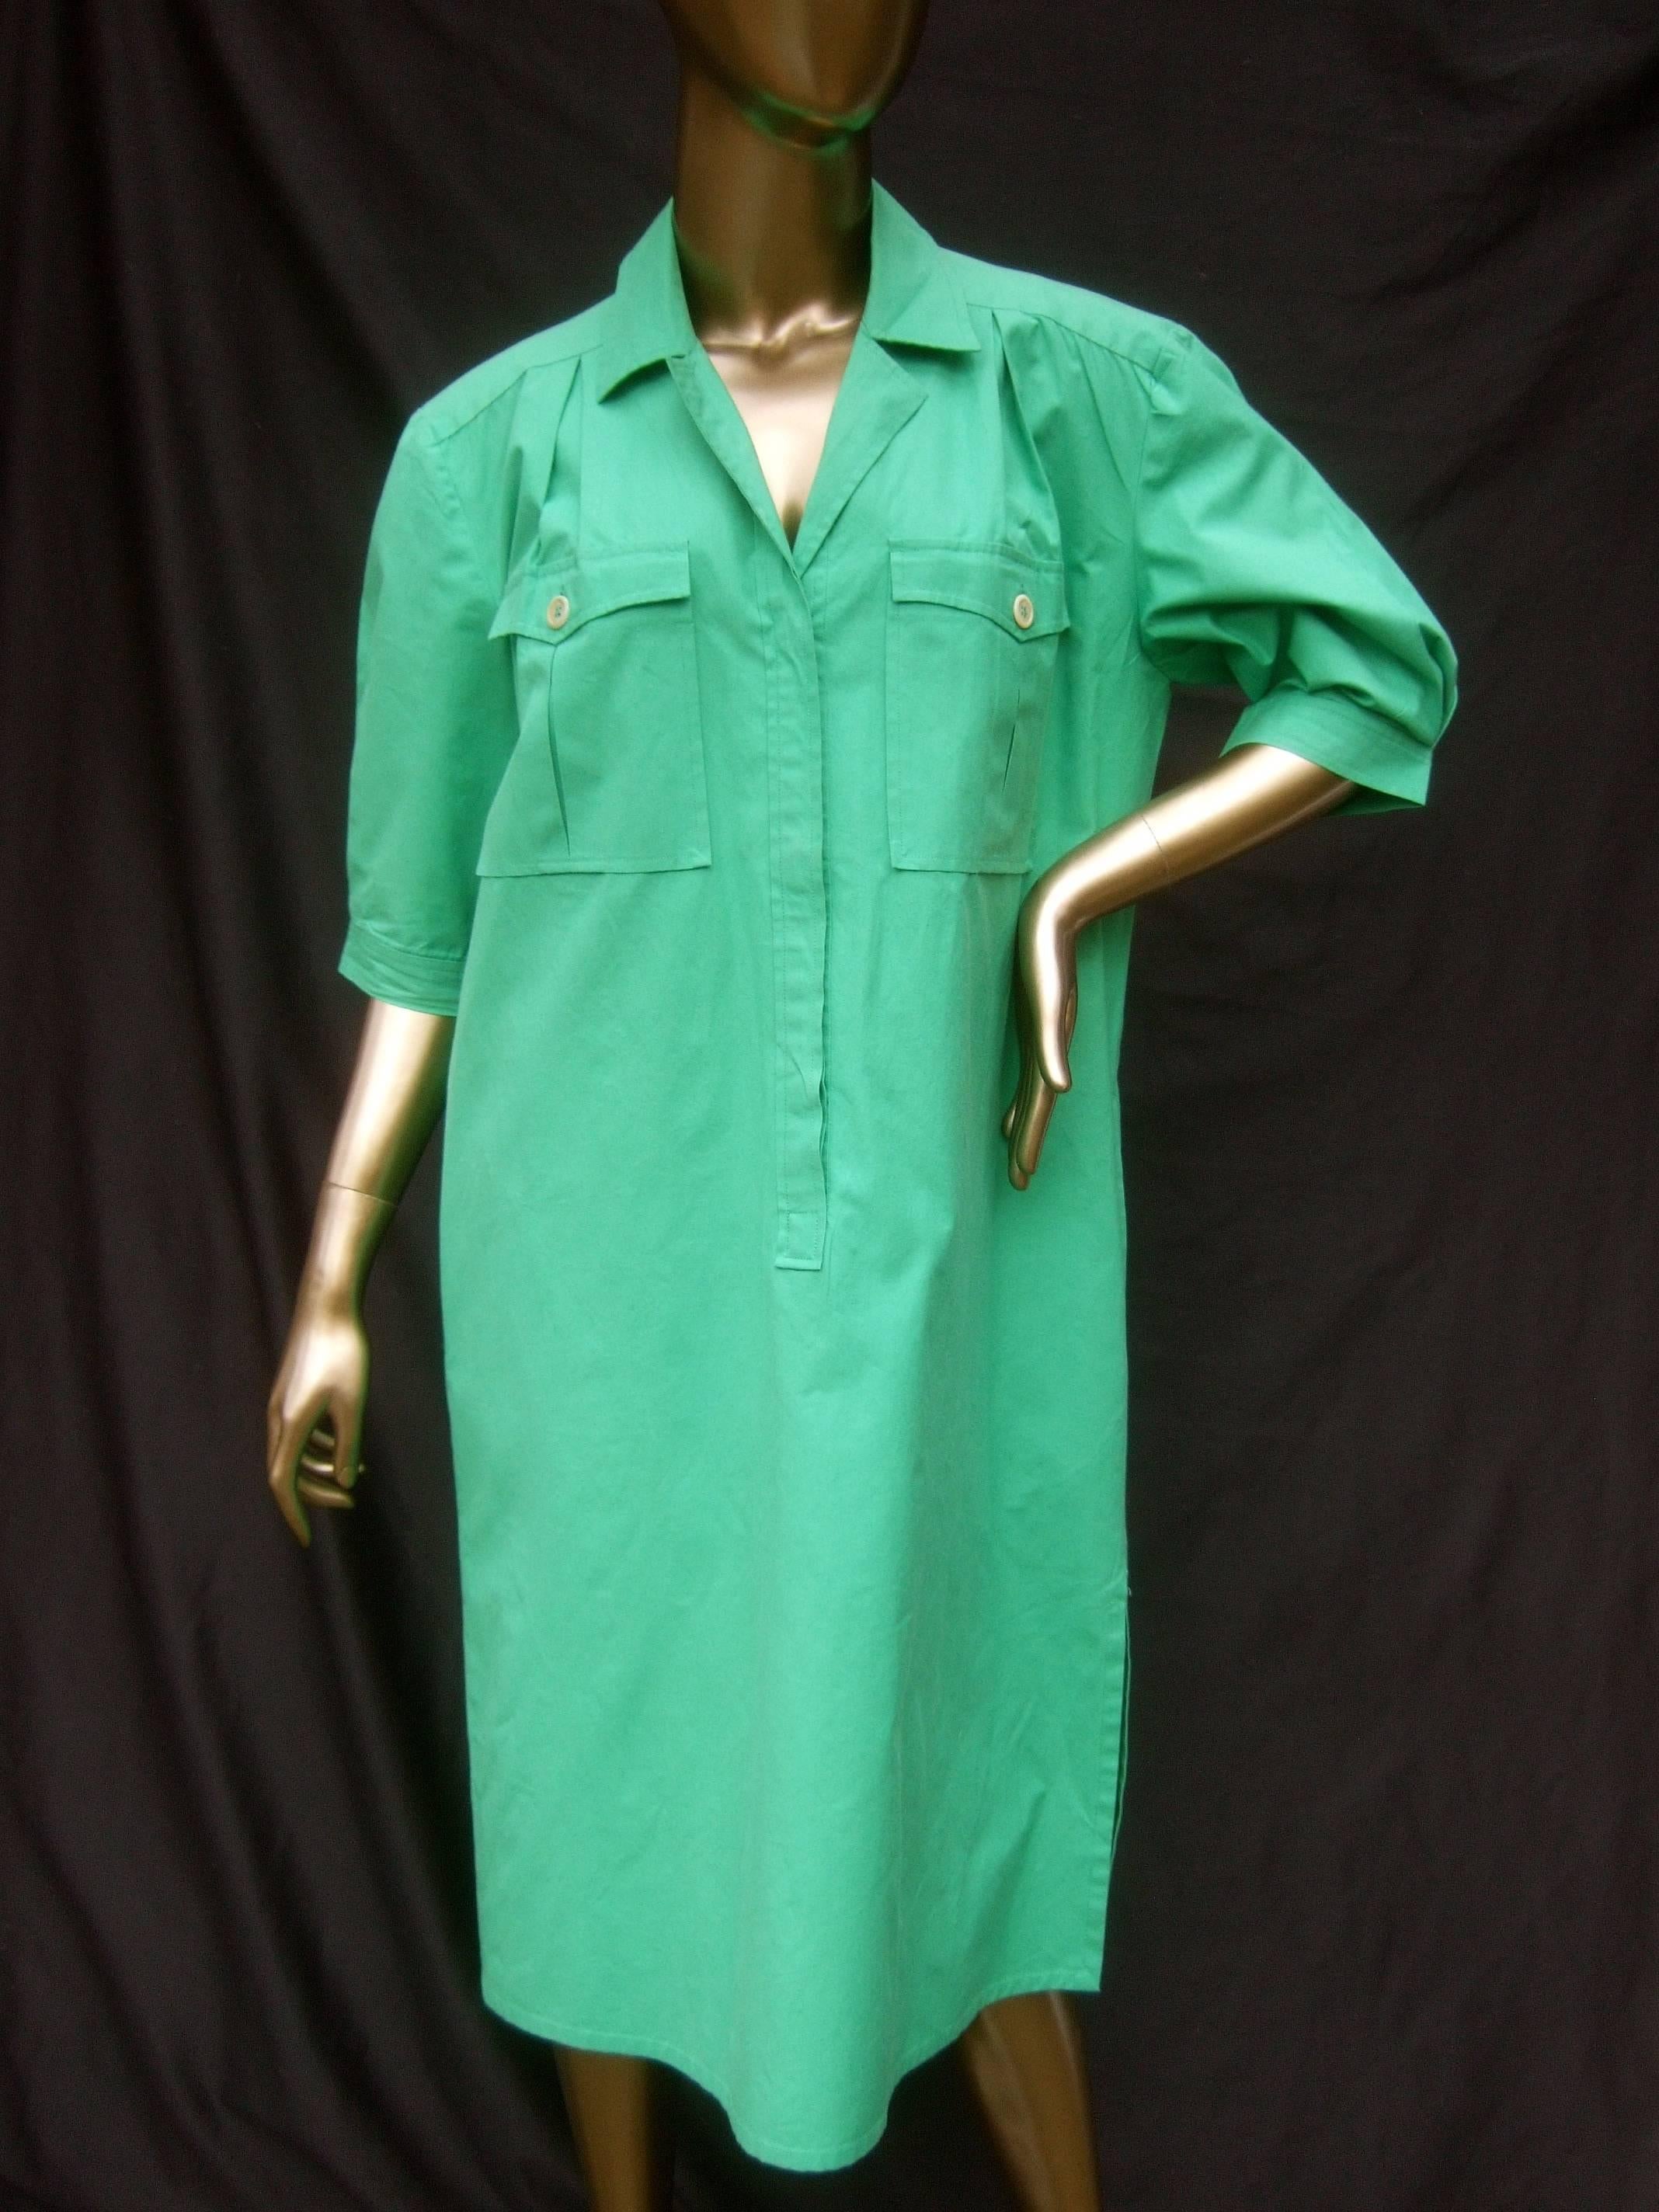 Gucci Italy Green cotton crisp shirt dress c 1970s
The stylish Italian shirtdress is designed with cool
cotton fabric

The front bodice has a pair of flap cover buttoned
pockets. The buttons that run down the front are
concealed 

The shoulders,